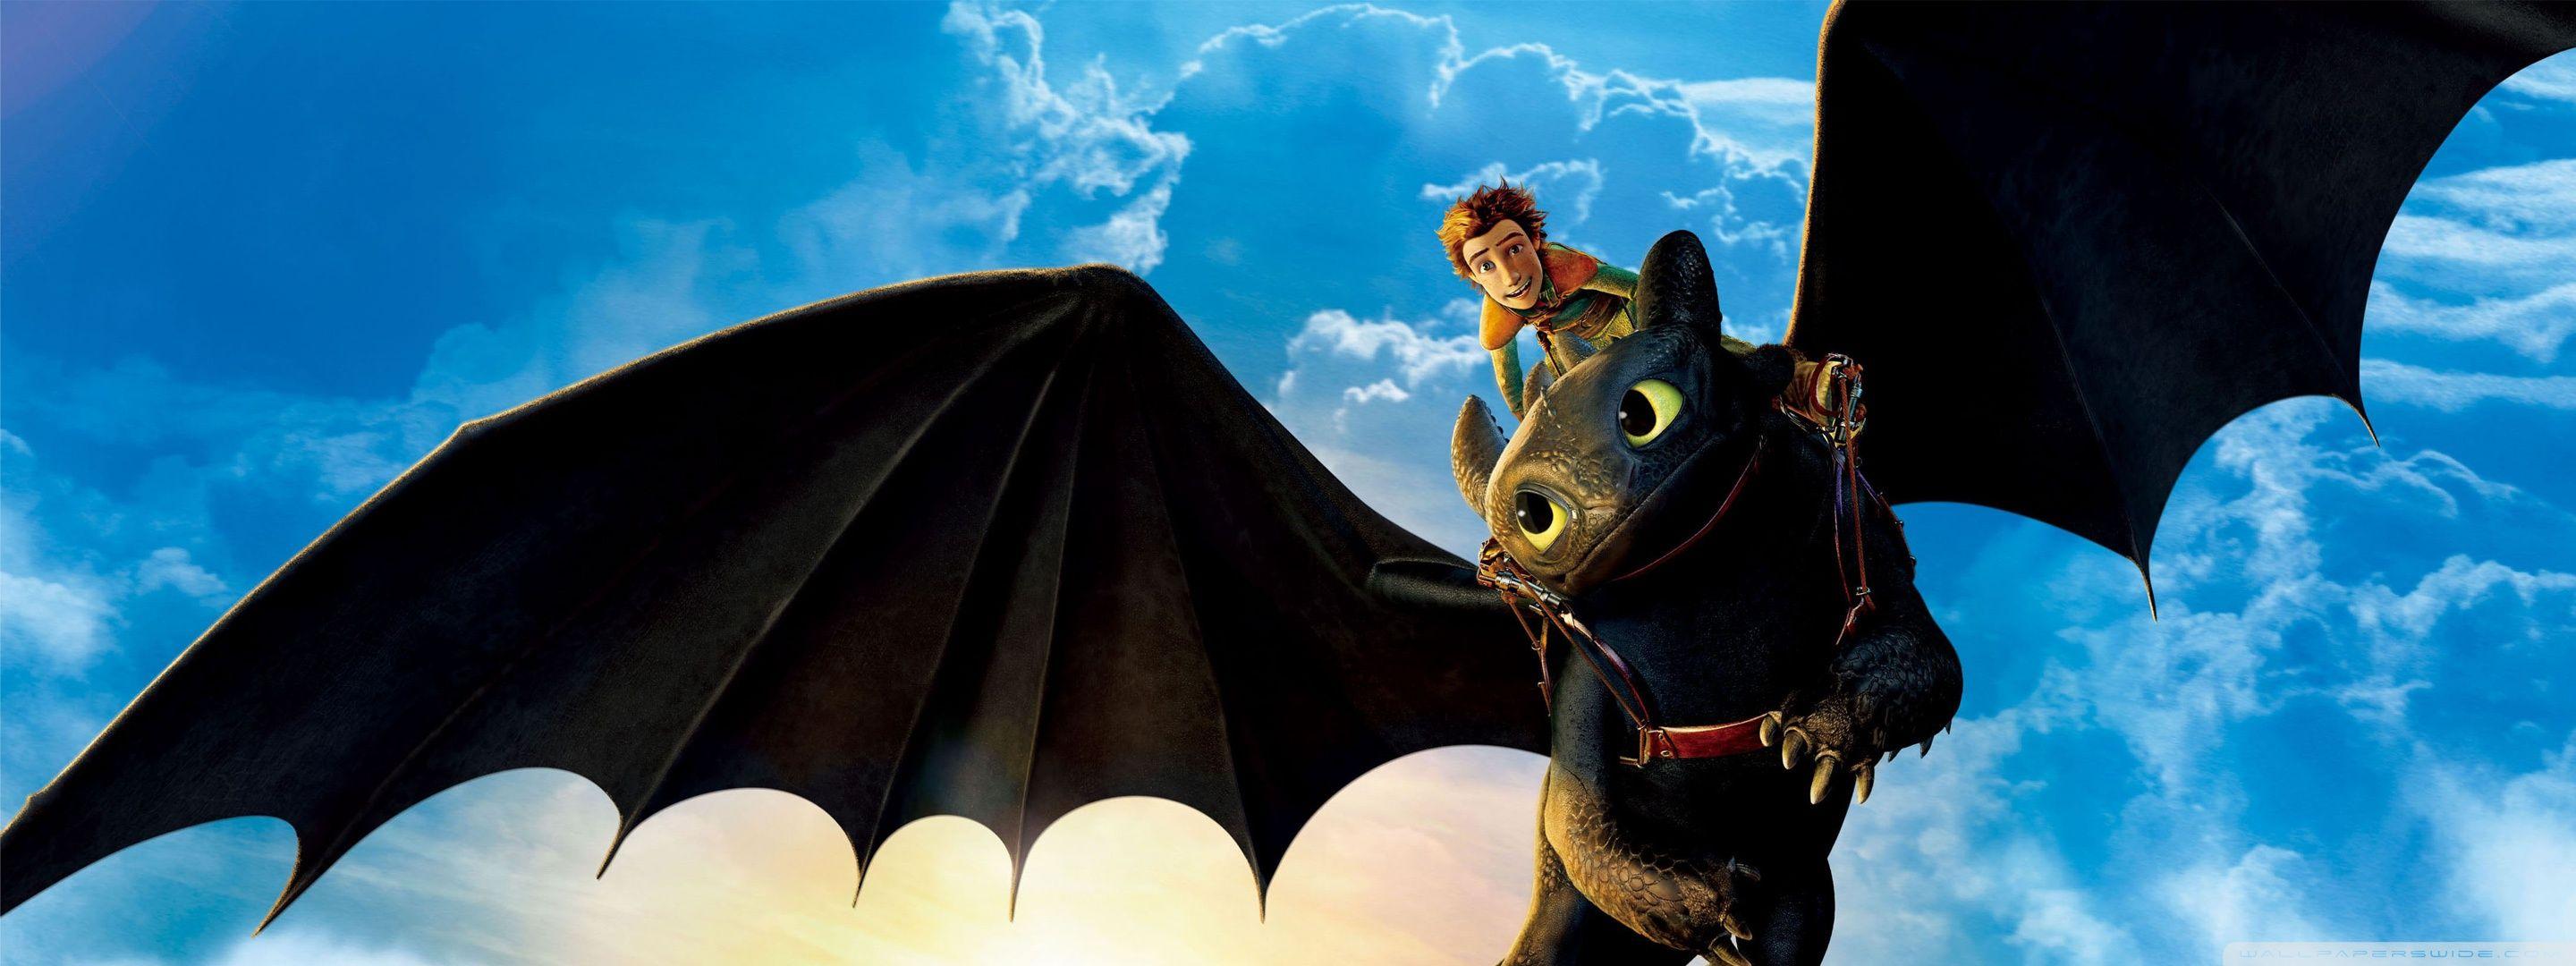 Hiccup and Toothless ❤ 4K HD Desktop Wallpaper for 4K Ultra HD TV